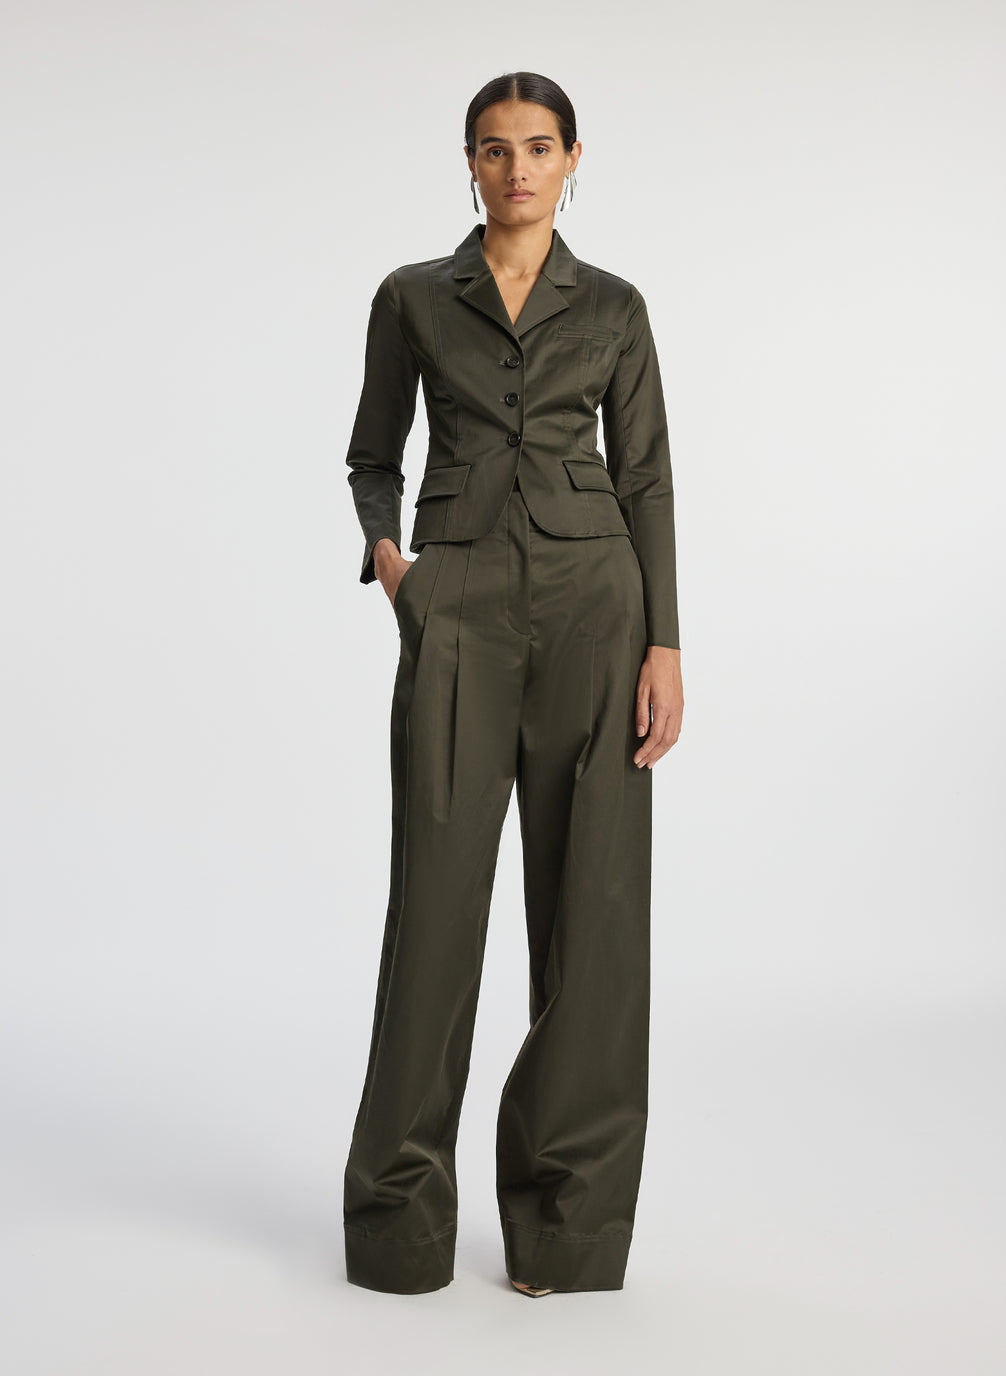 front view of woman in olive green sateen suit jacket and wide leg pants